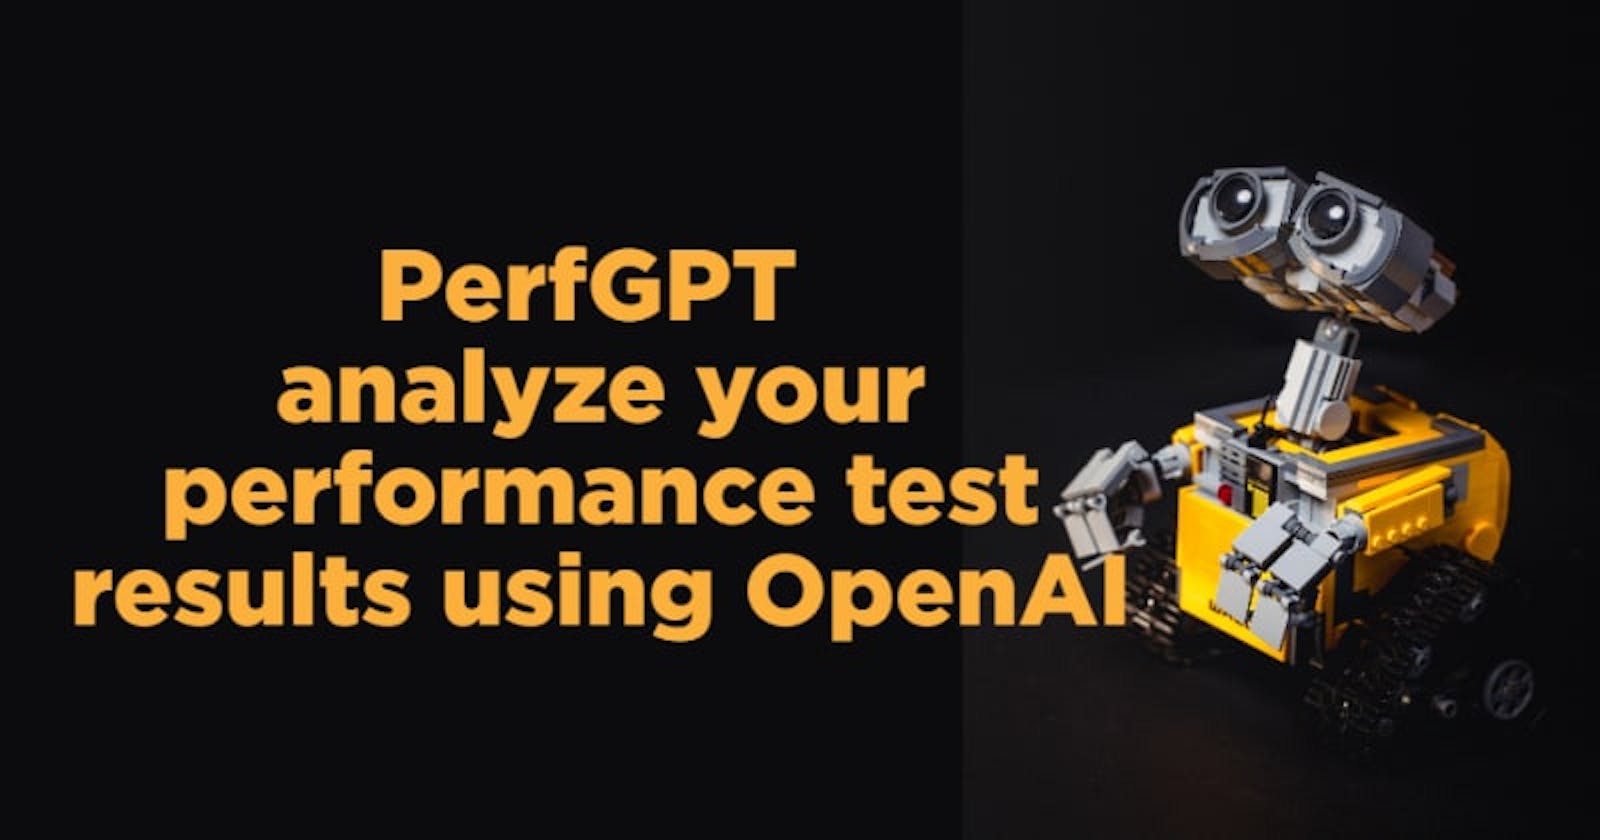 Introducing PerfGPT - analyze your performance test results using OpenAI